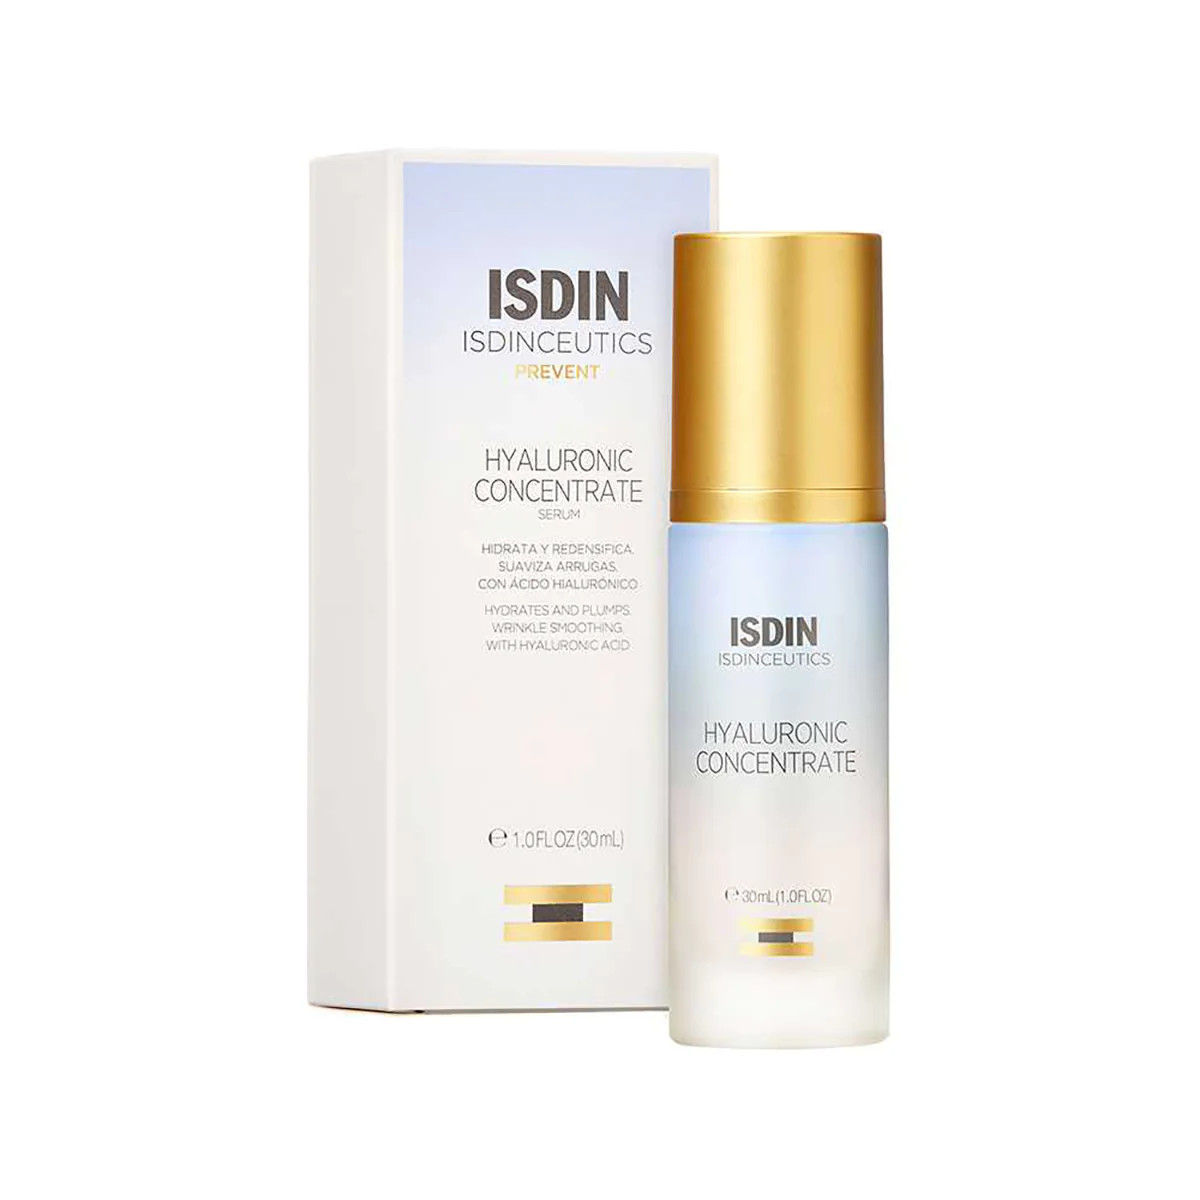  ISDIN 0678 IC HYALURONIC CONCENTRATE Unid x 30 ML